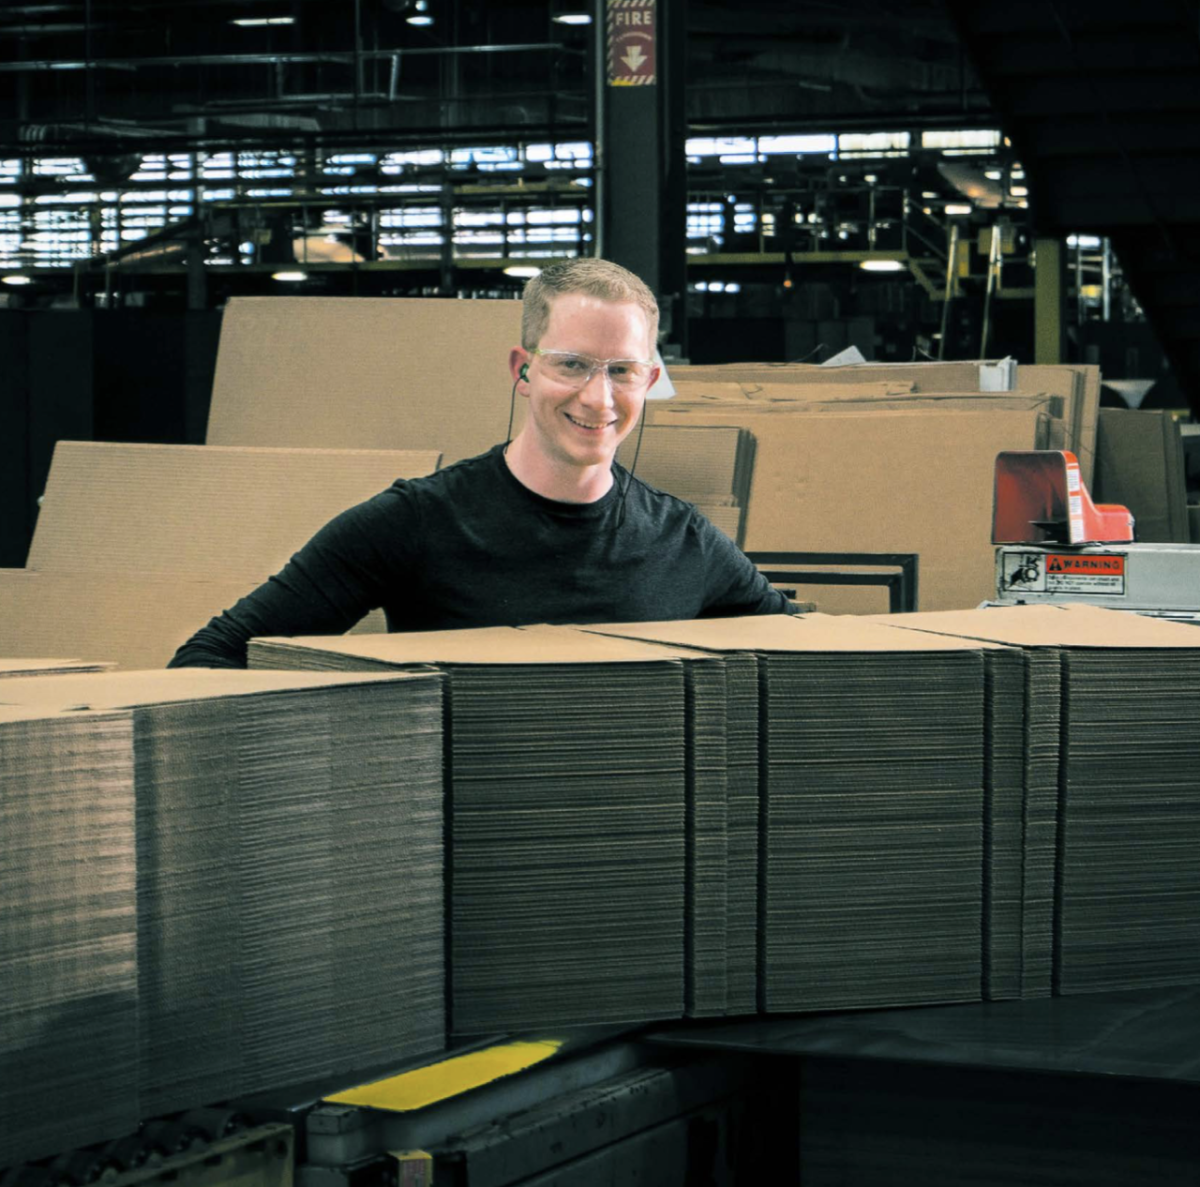 worker in a black shirt and safety glasses standing behind stacks of cardboard